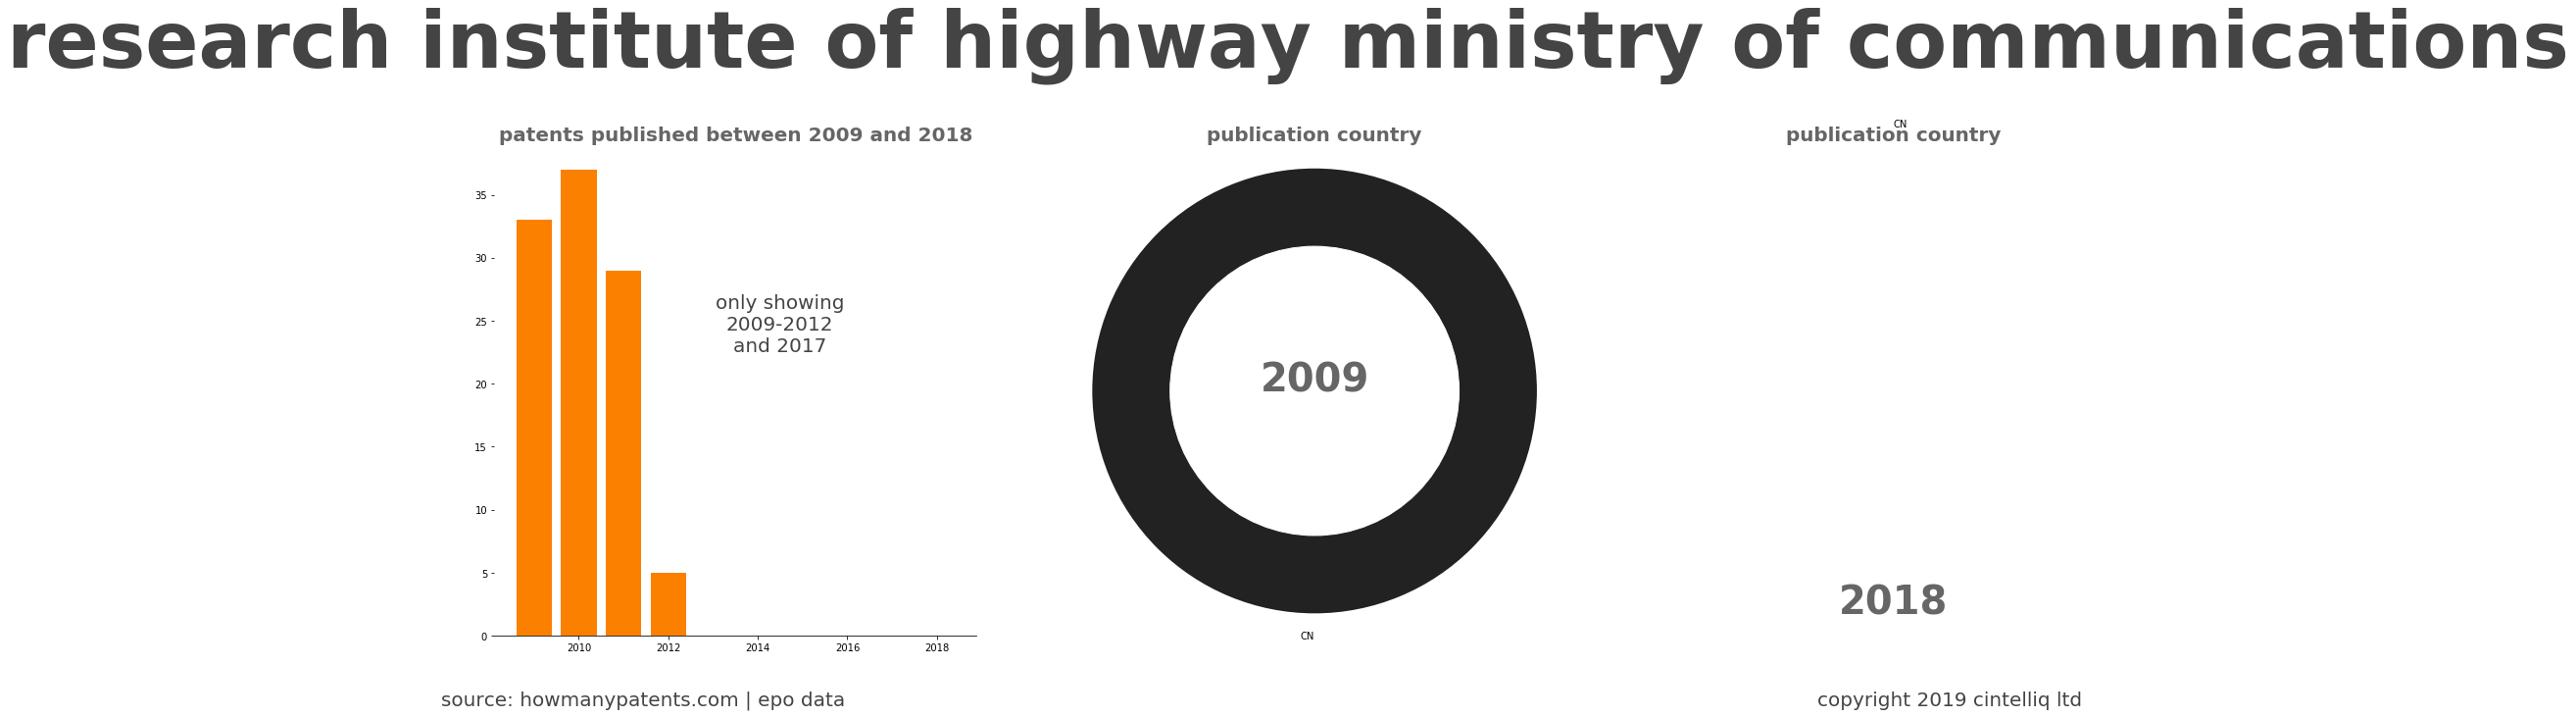 summary of patents for Research Institute Of Highway Ministry Of Communications